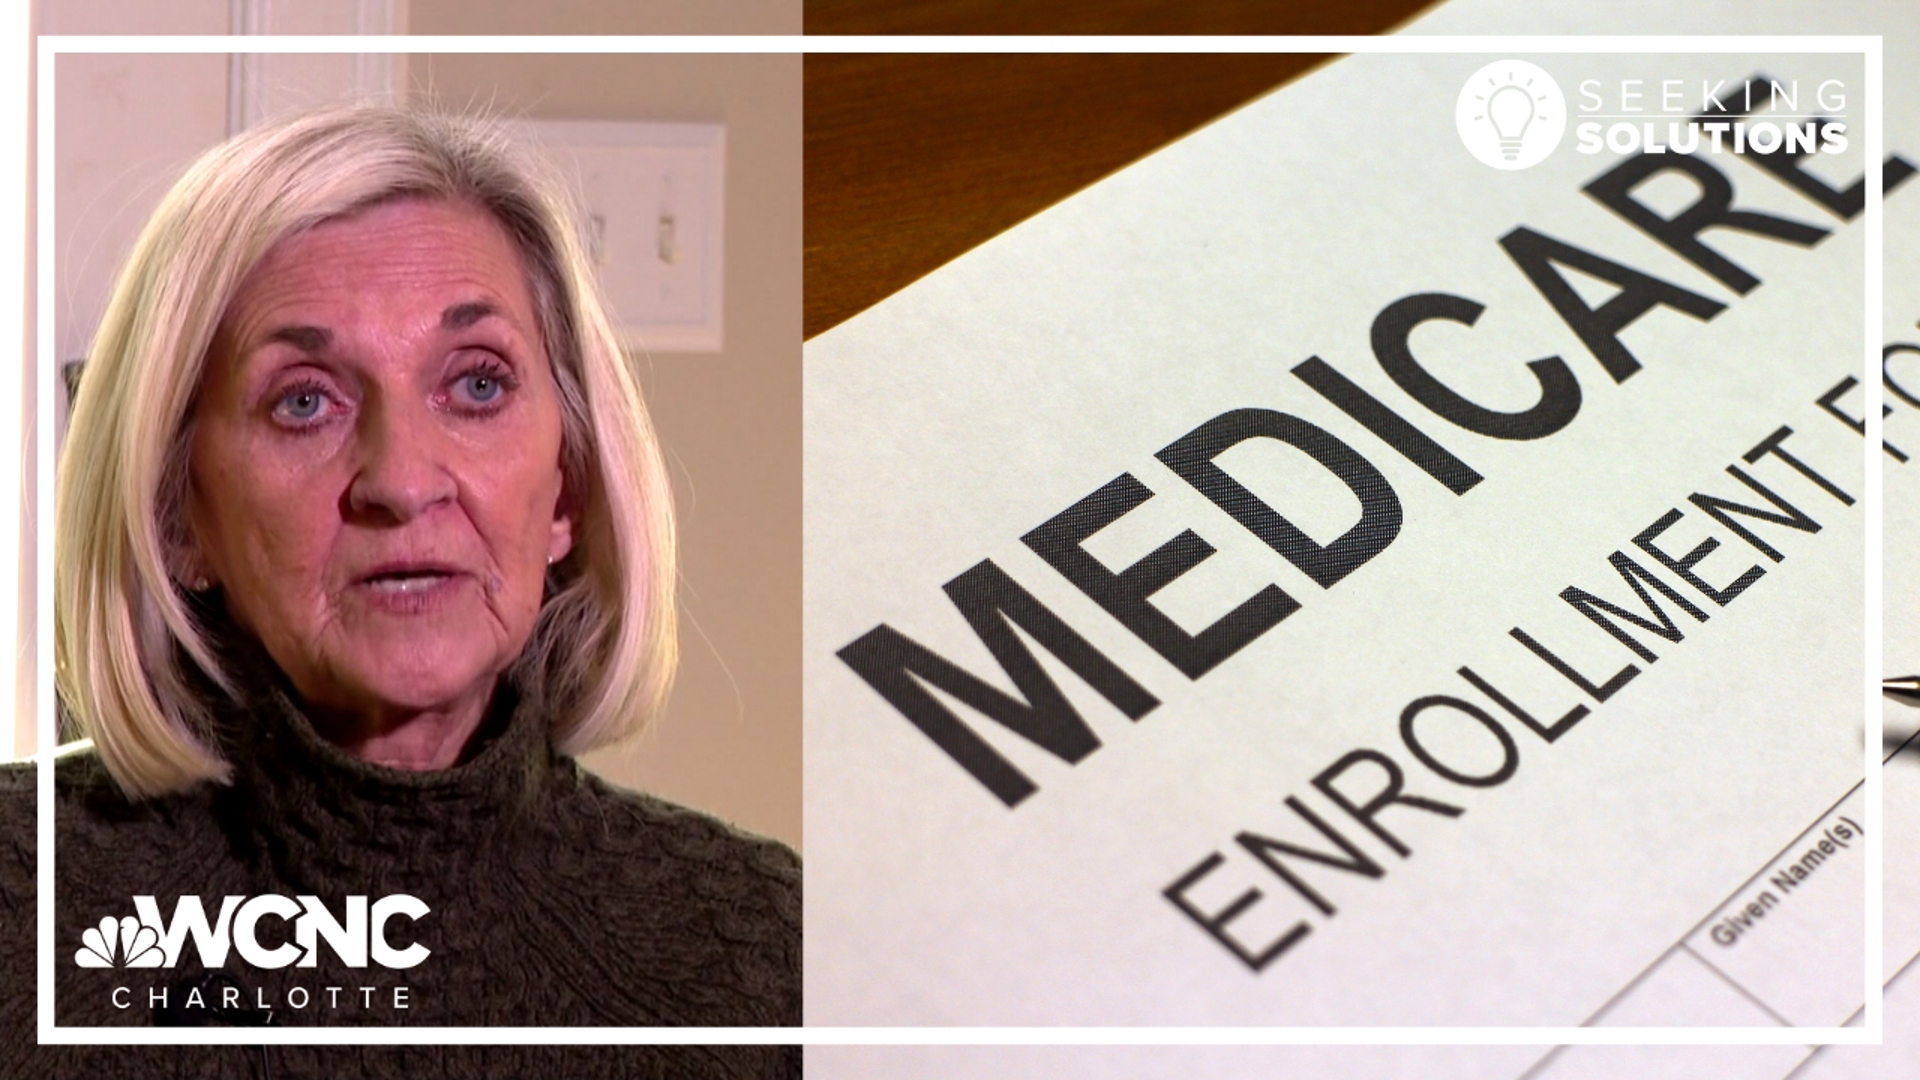 The federal government mistakenly ended Pam Ellis' Medicare insurance coverage in the middle of her stage 4 cancer battle and while she was disputing a $3,000 bill.